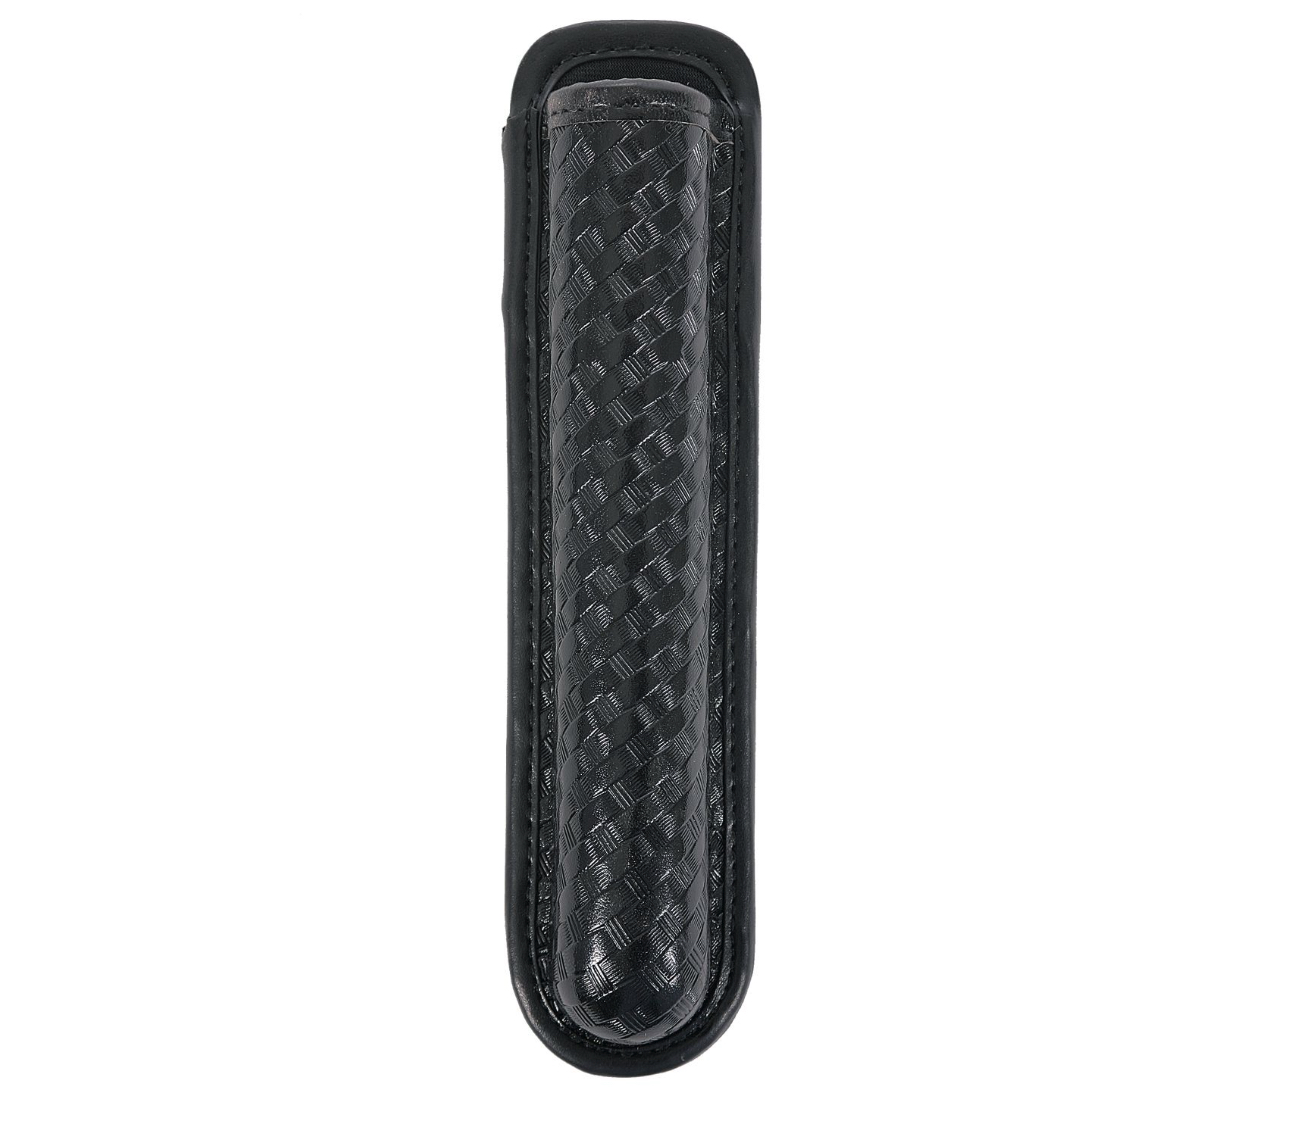 FIVE STAR BASKET WEAVE SYNTHETIC LEATHER EXPANDABLE BATON HOLDER ...